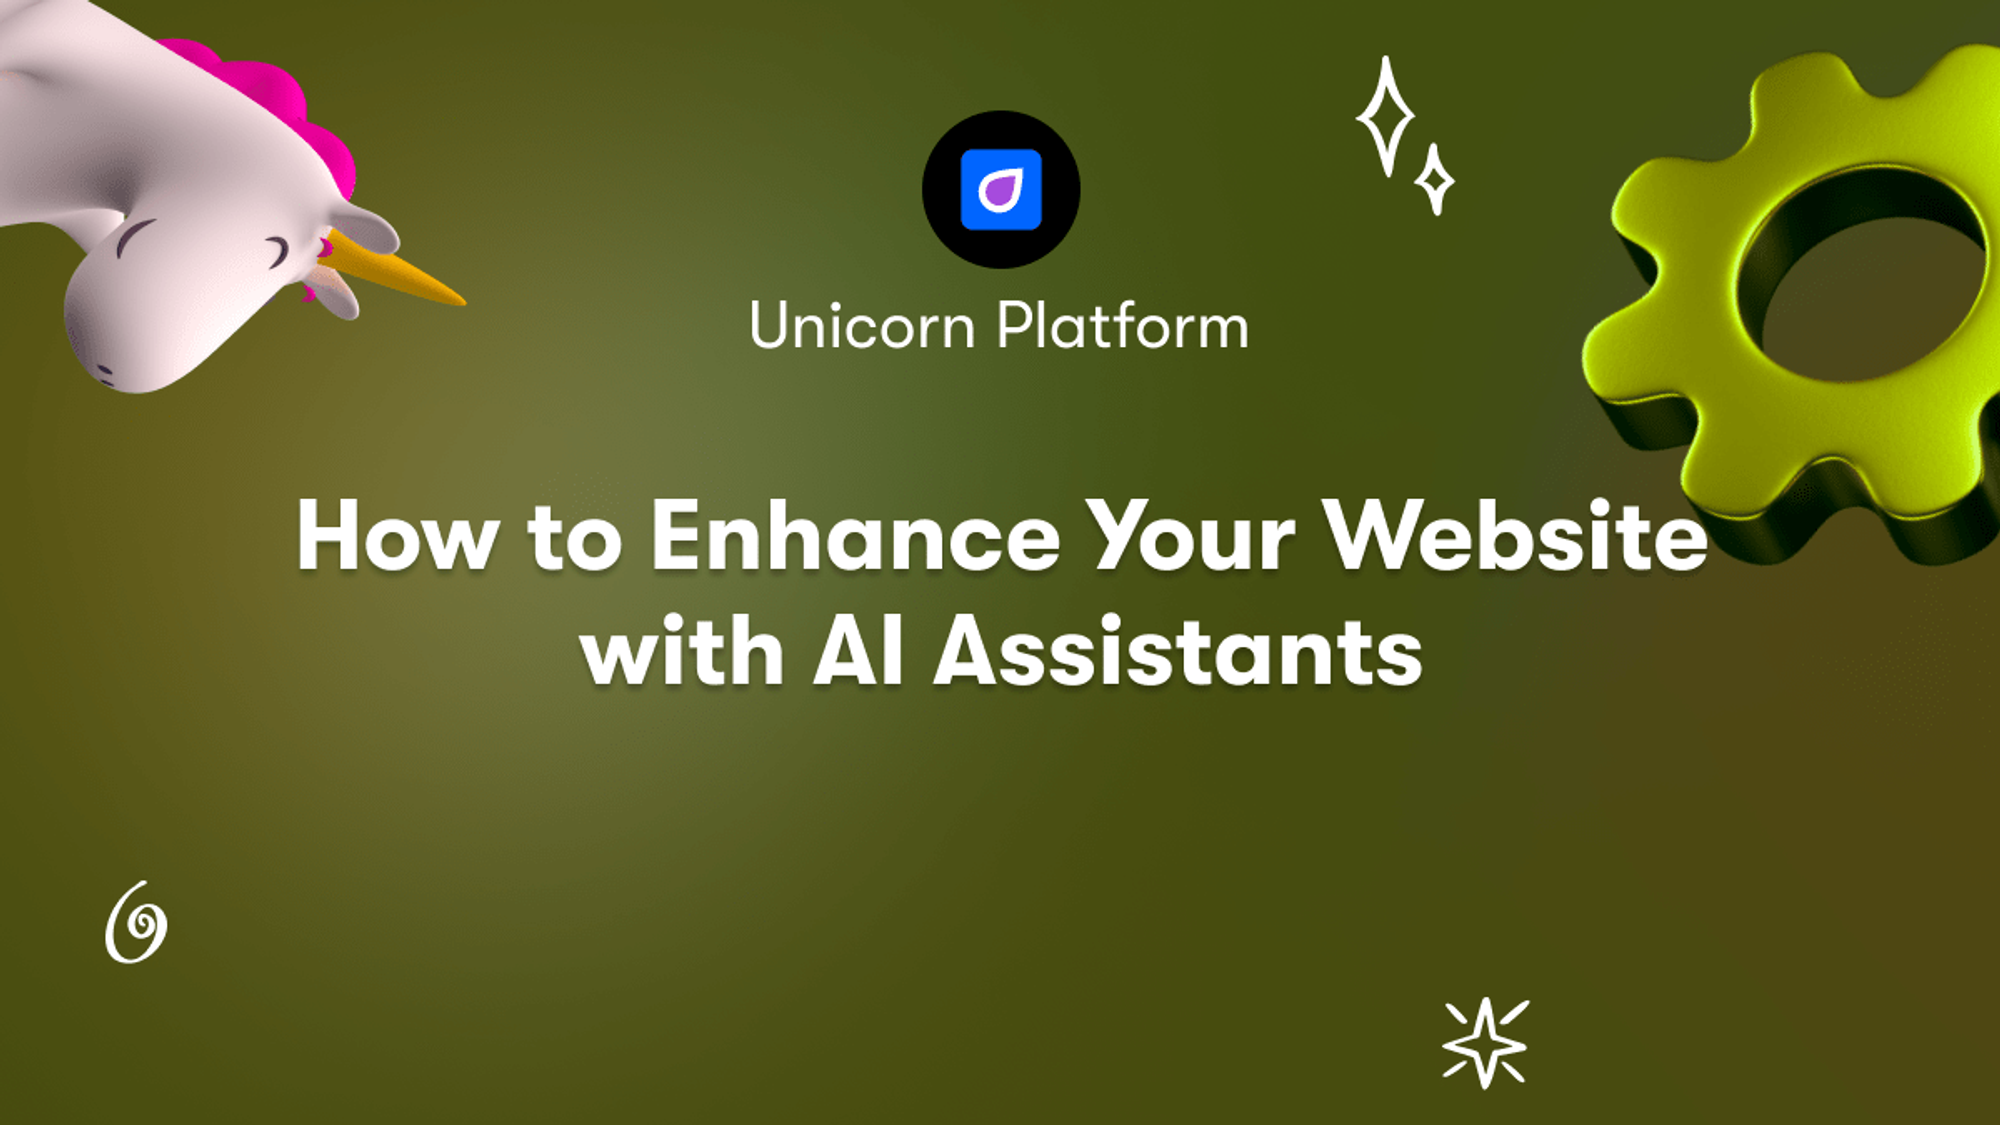 How to Enhance Your Website with AI Assistants